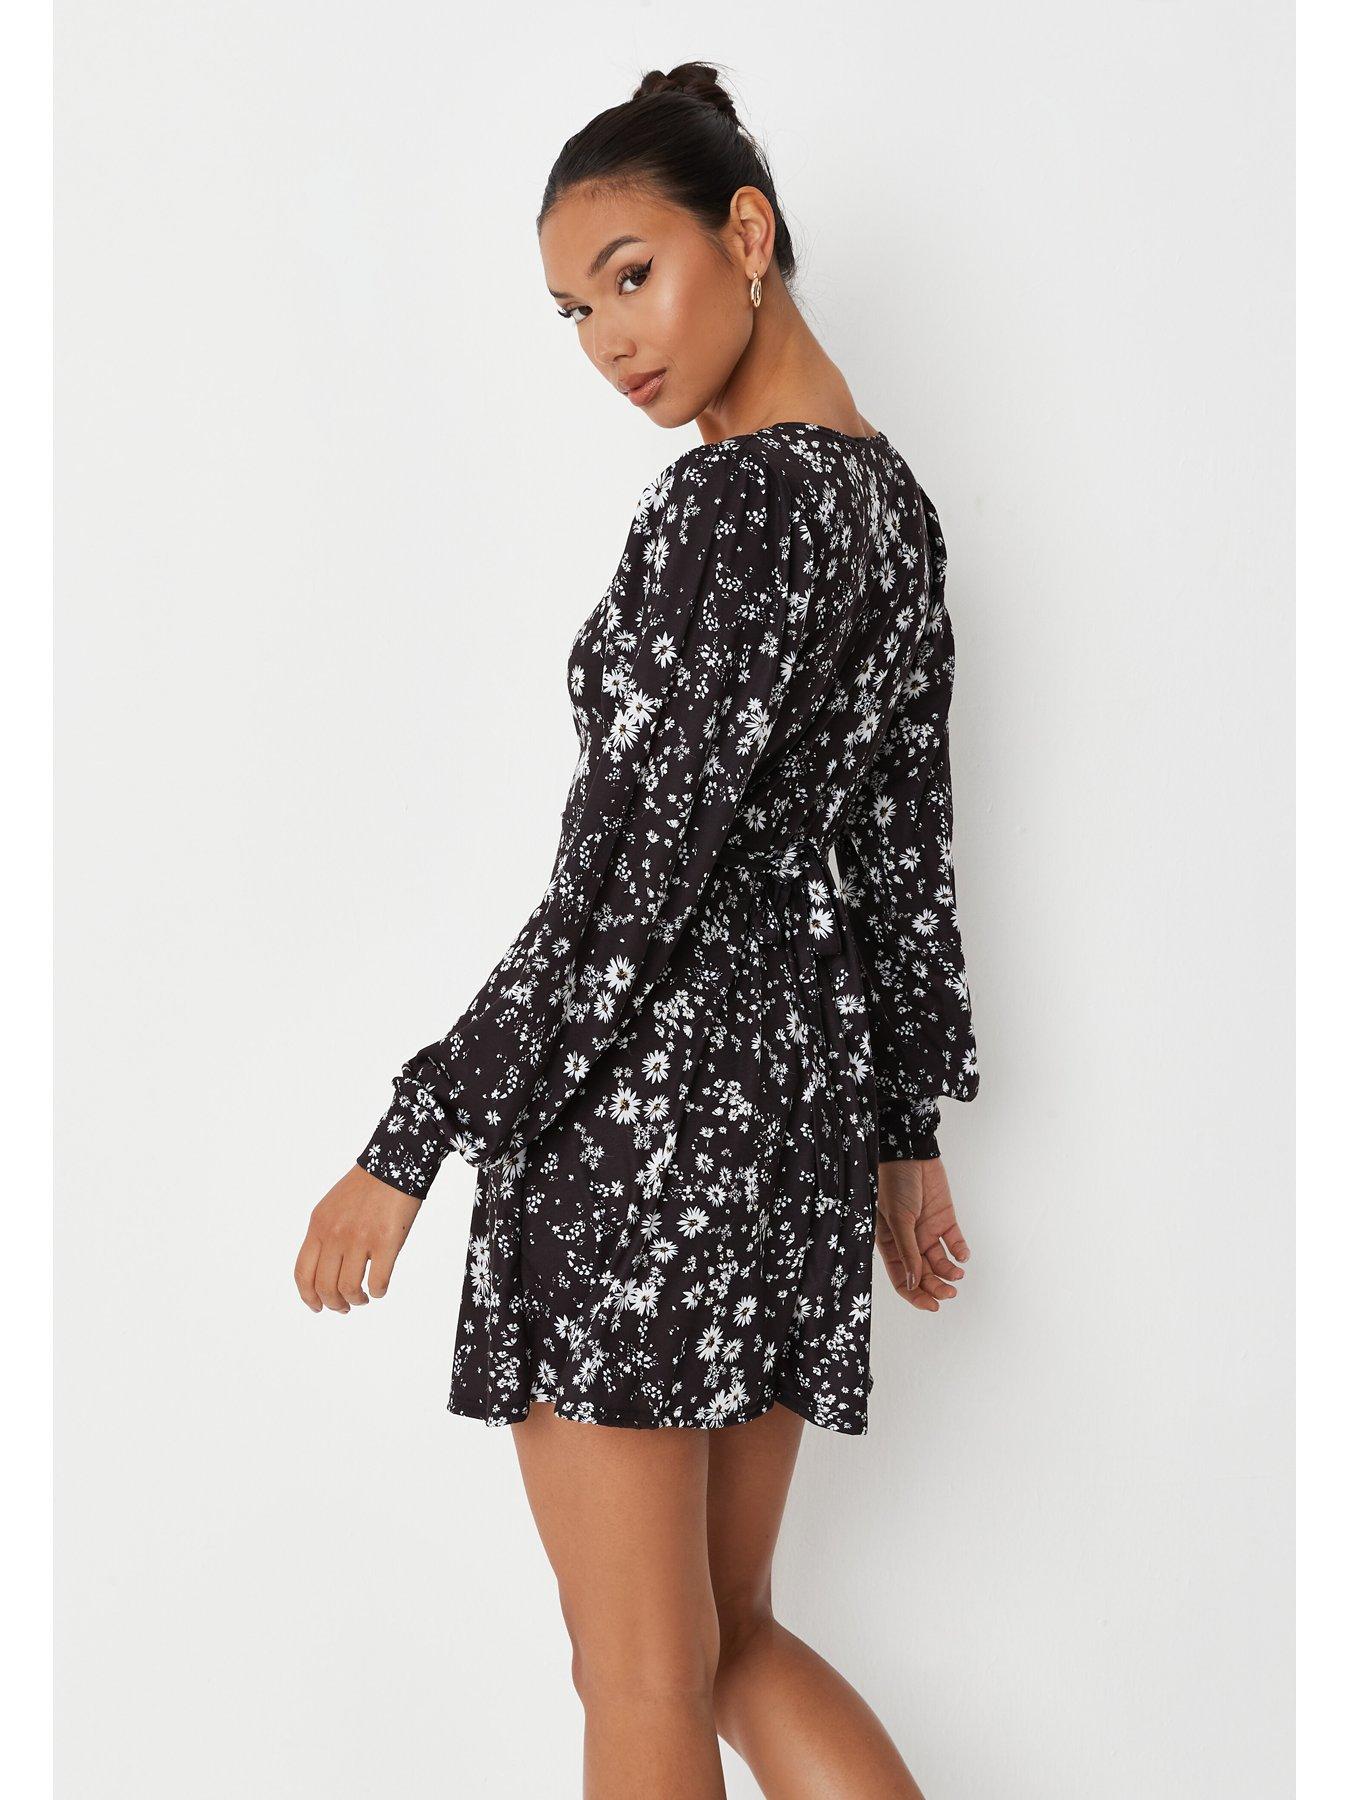 Missguided Missguided Floral Wrap Dress ...